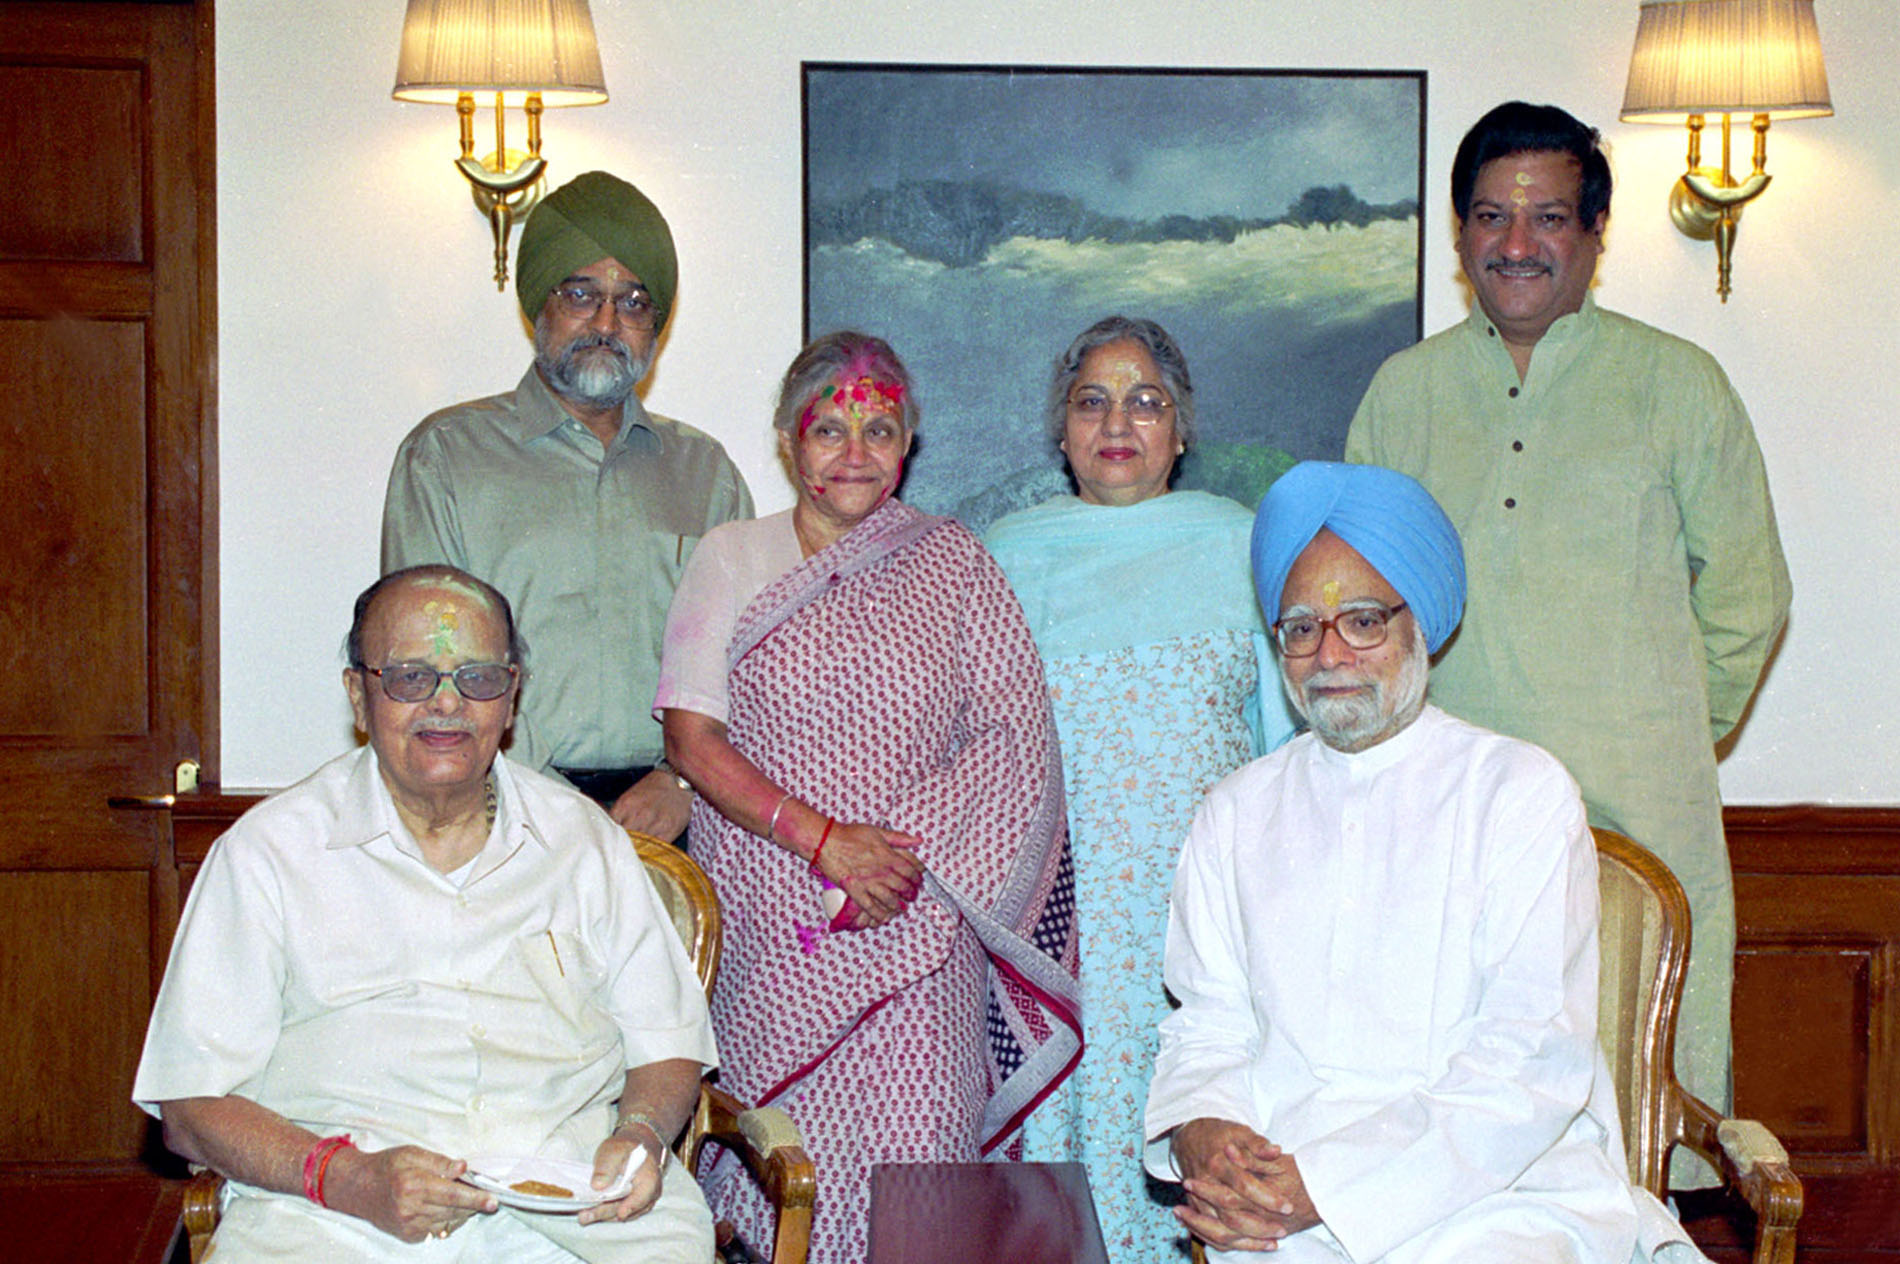 Manmohan Singh and his wife Smt. Gursharan Kaur with the Union Minister for Human Resource Development Shri Arjun Singh and the Chief Minister of Delhi Smt. Shiela Dikshit and others who called on